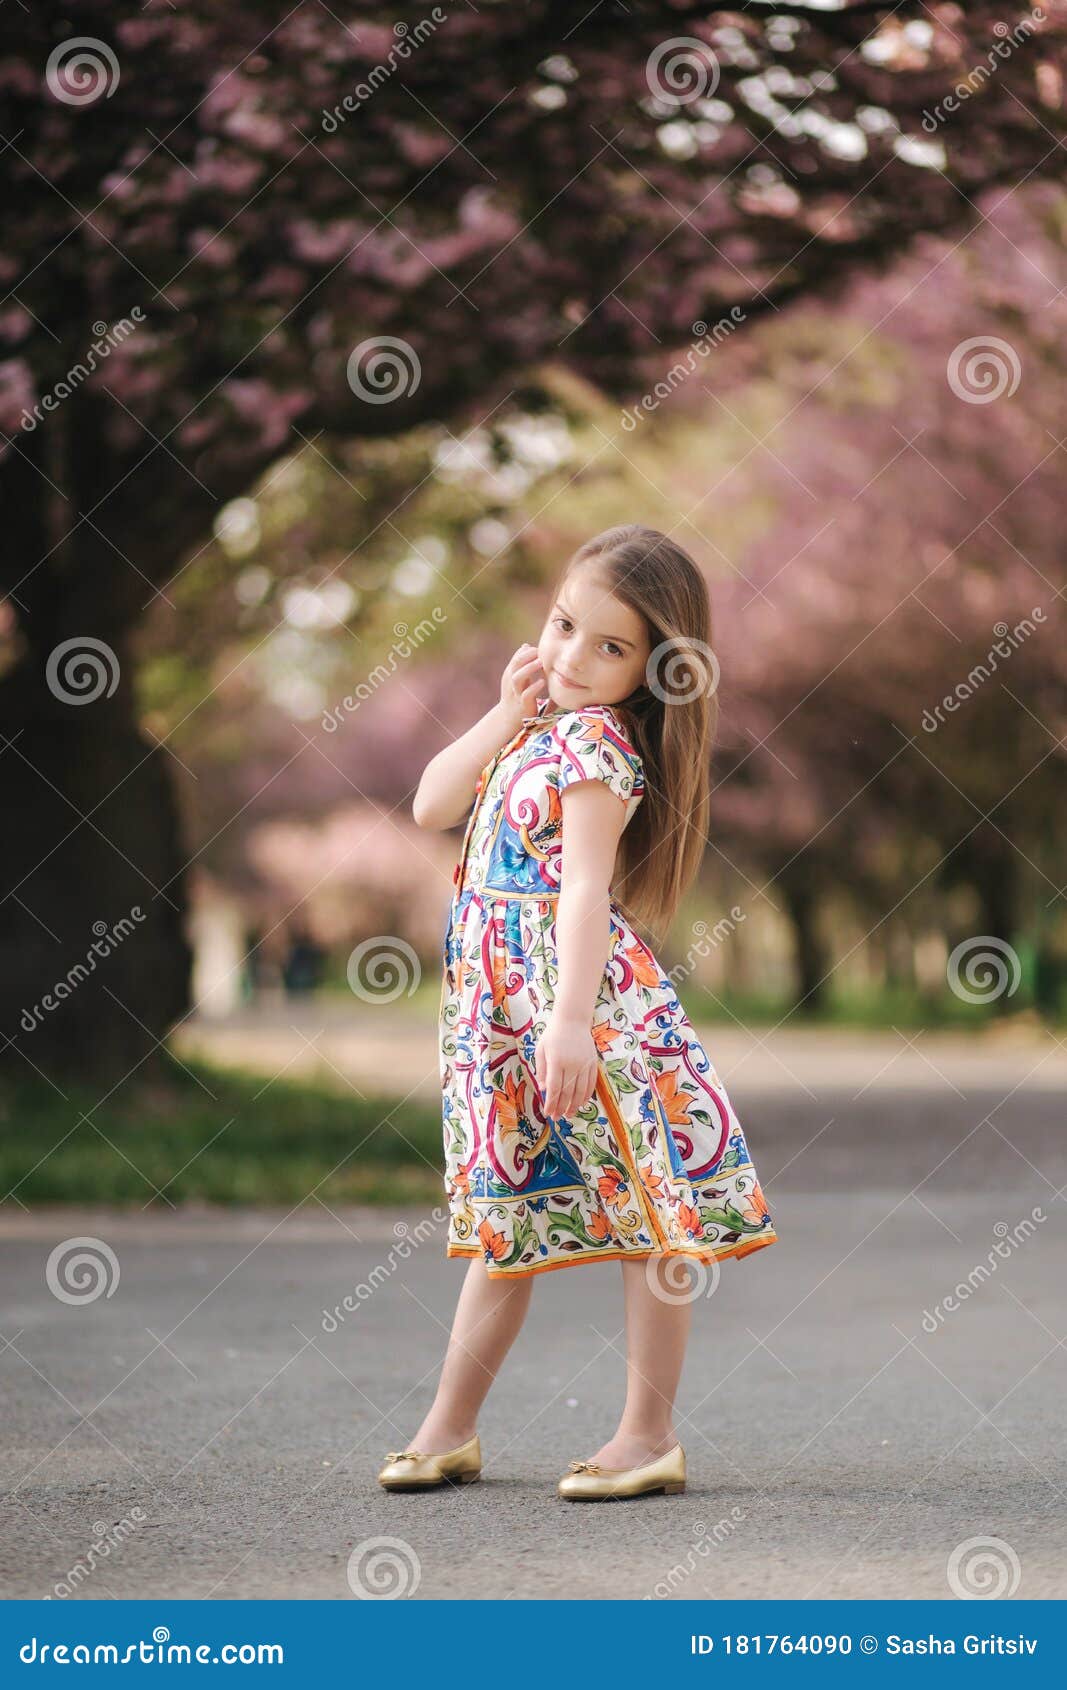 Premium PSD | A pessimistic toddler woman with curly hair from the hispanic  ethnicity dressed in fishing by the lake attire poses in a tilted head with  a grin style against a